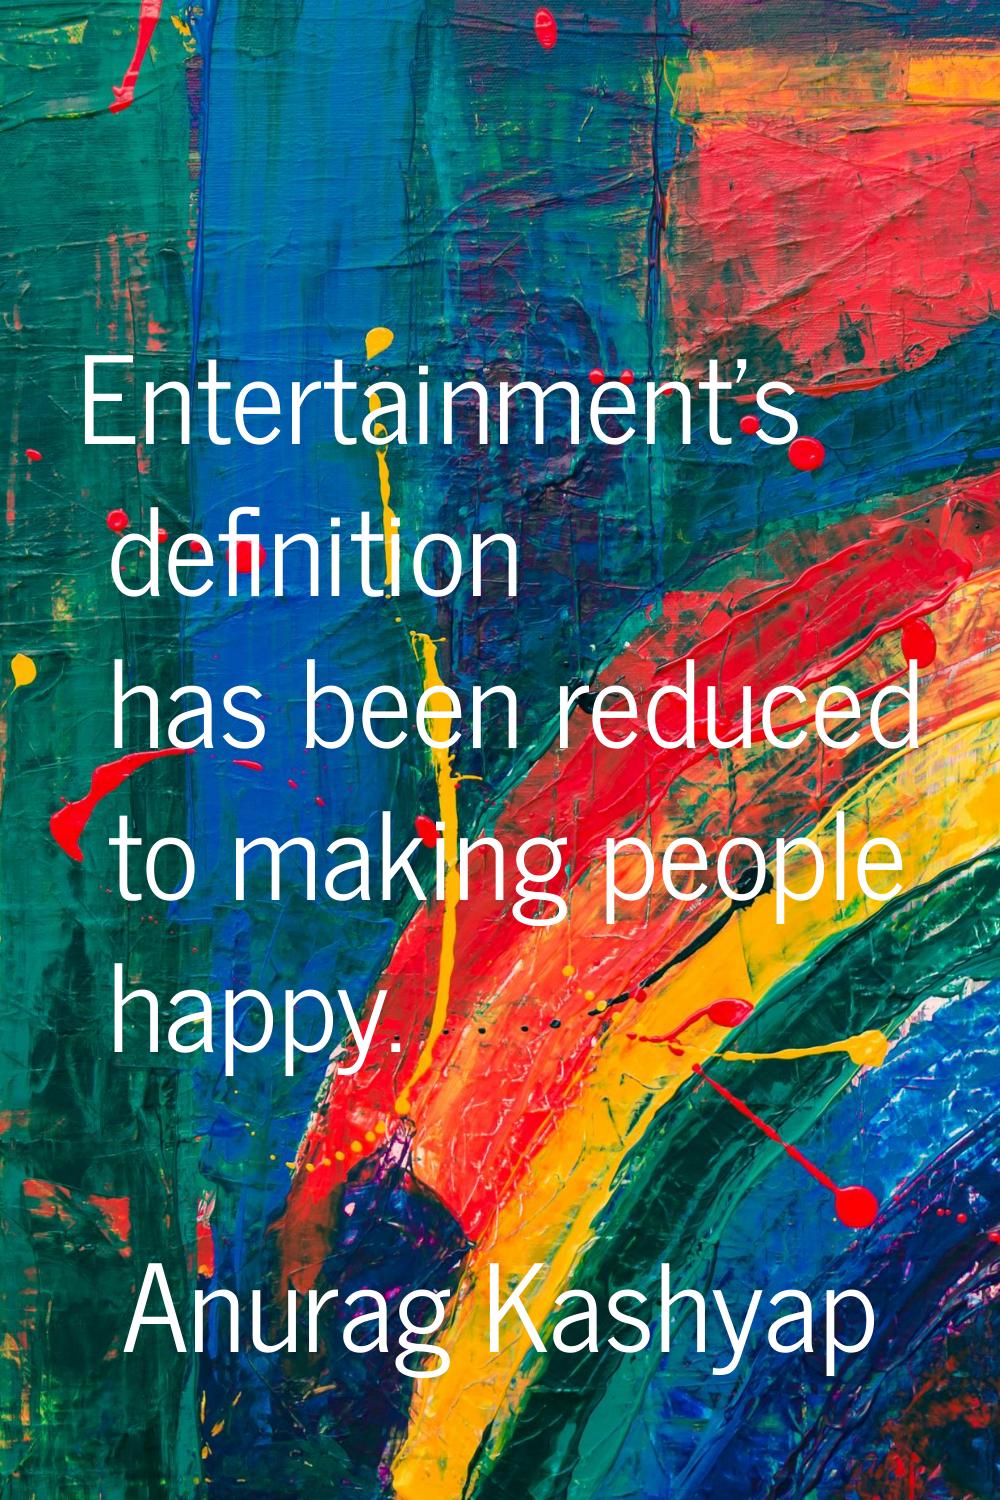 Entertainment's definition has been reduced to making people happy.